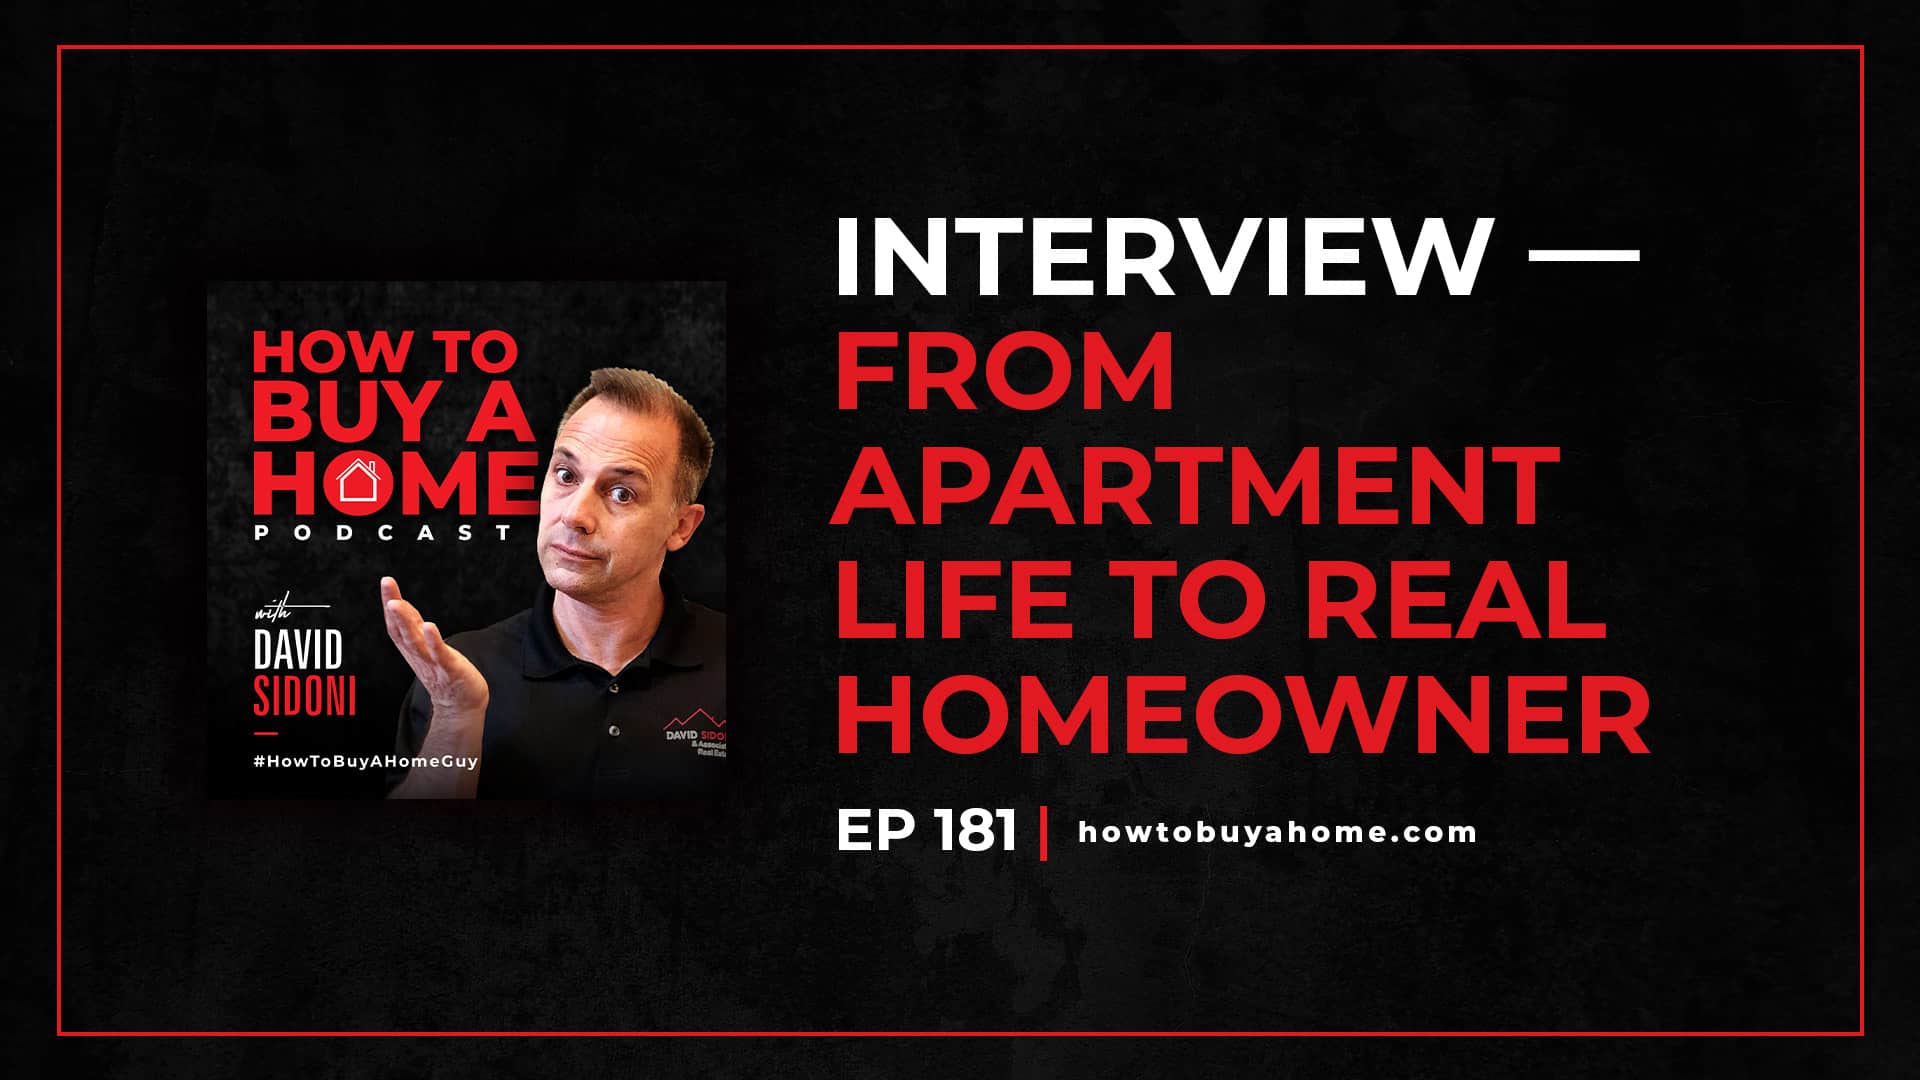 Ep. 181 – INTERVIEW – From Apartment Life to Real Homeowner